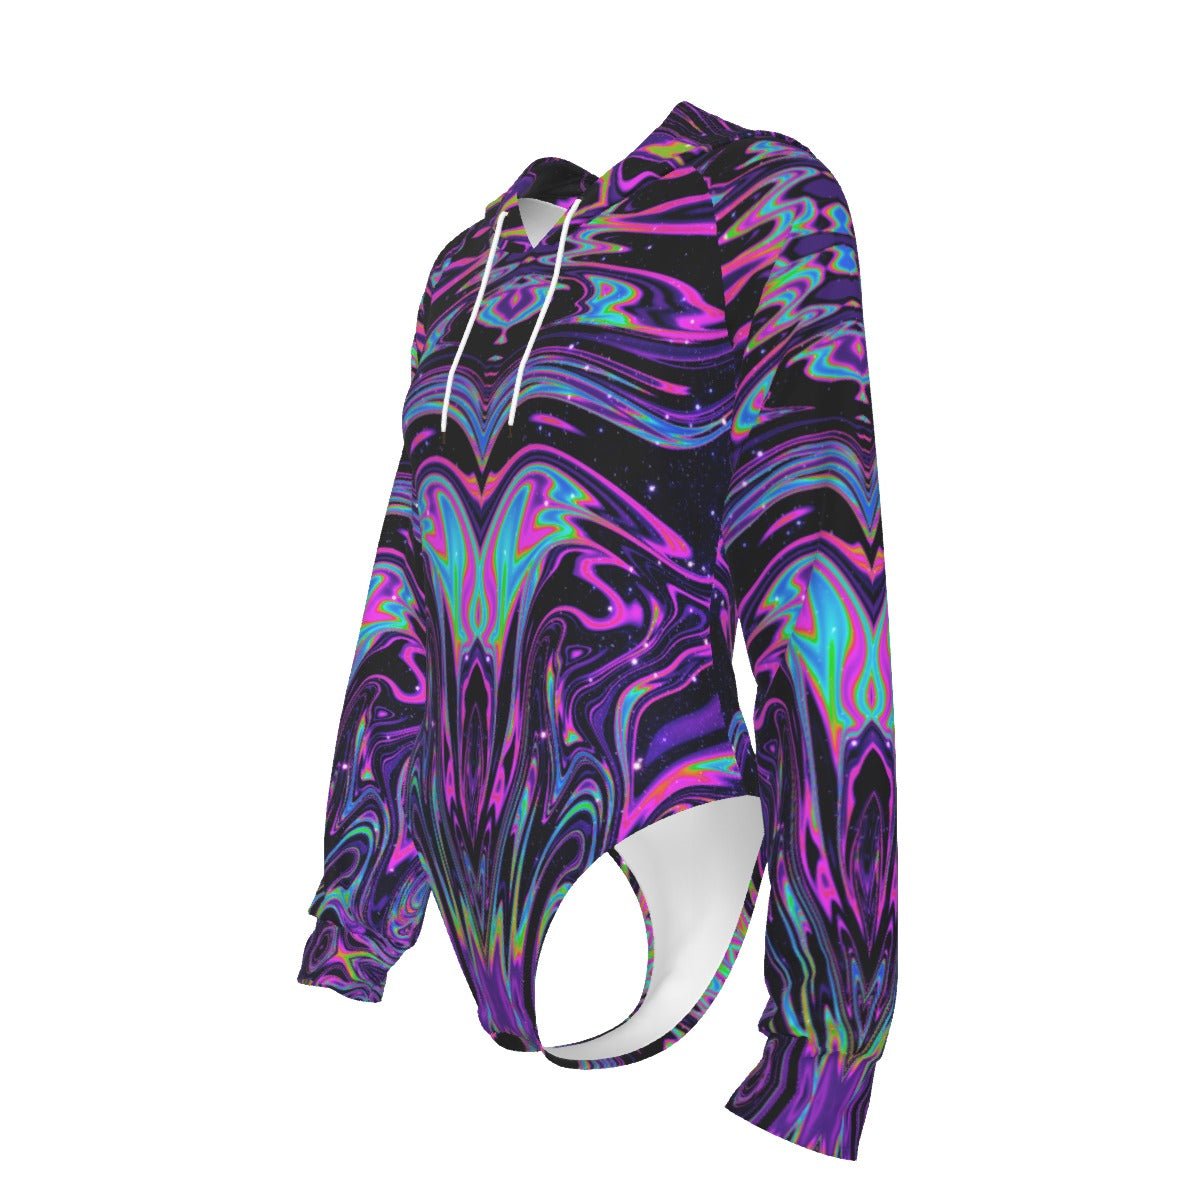 Trippy Festival Hooded Bodysuit with Long Sleeves - BeExtra! Apparel & More